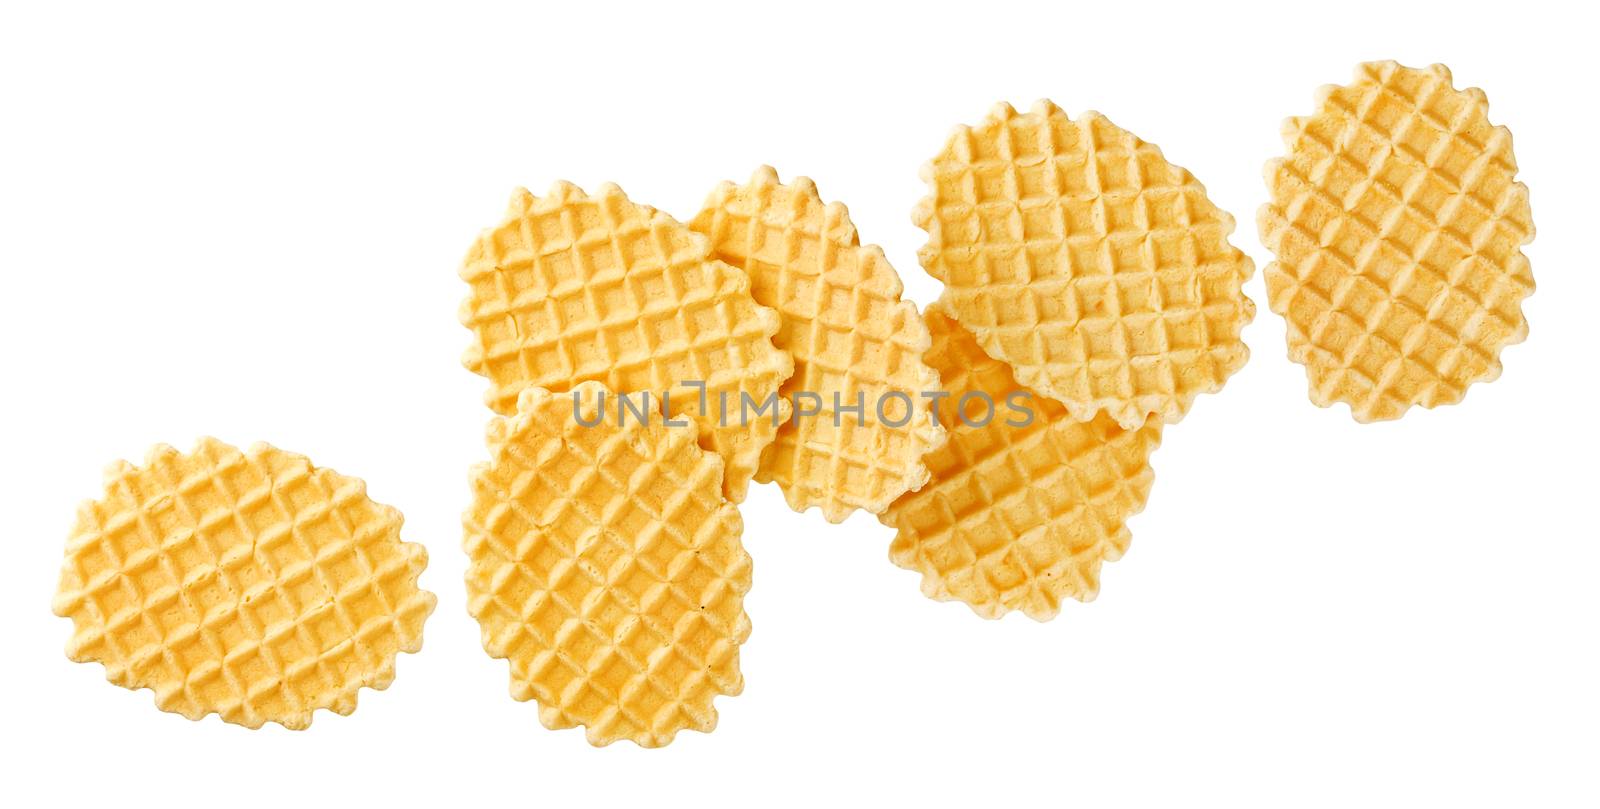 Belgian waffles isolated on white background with clipping path. Collection